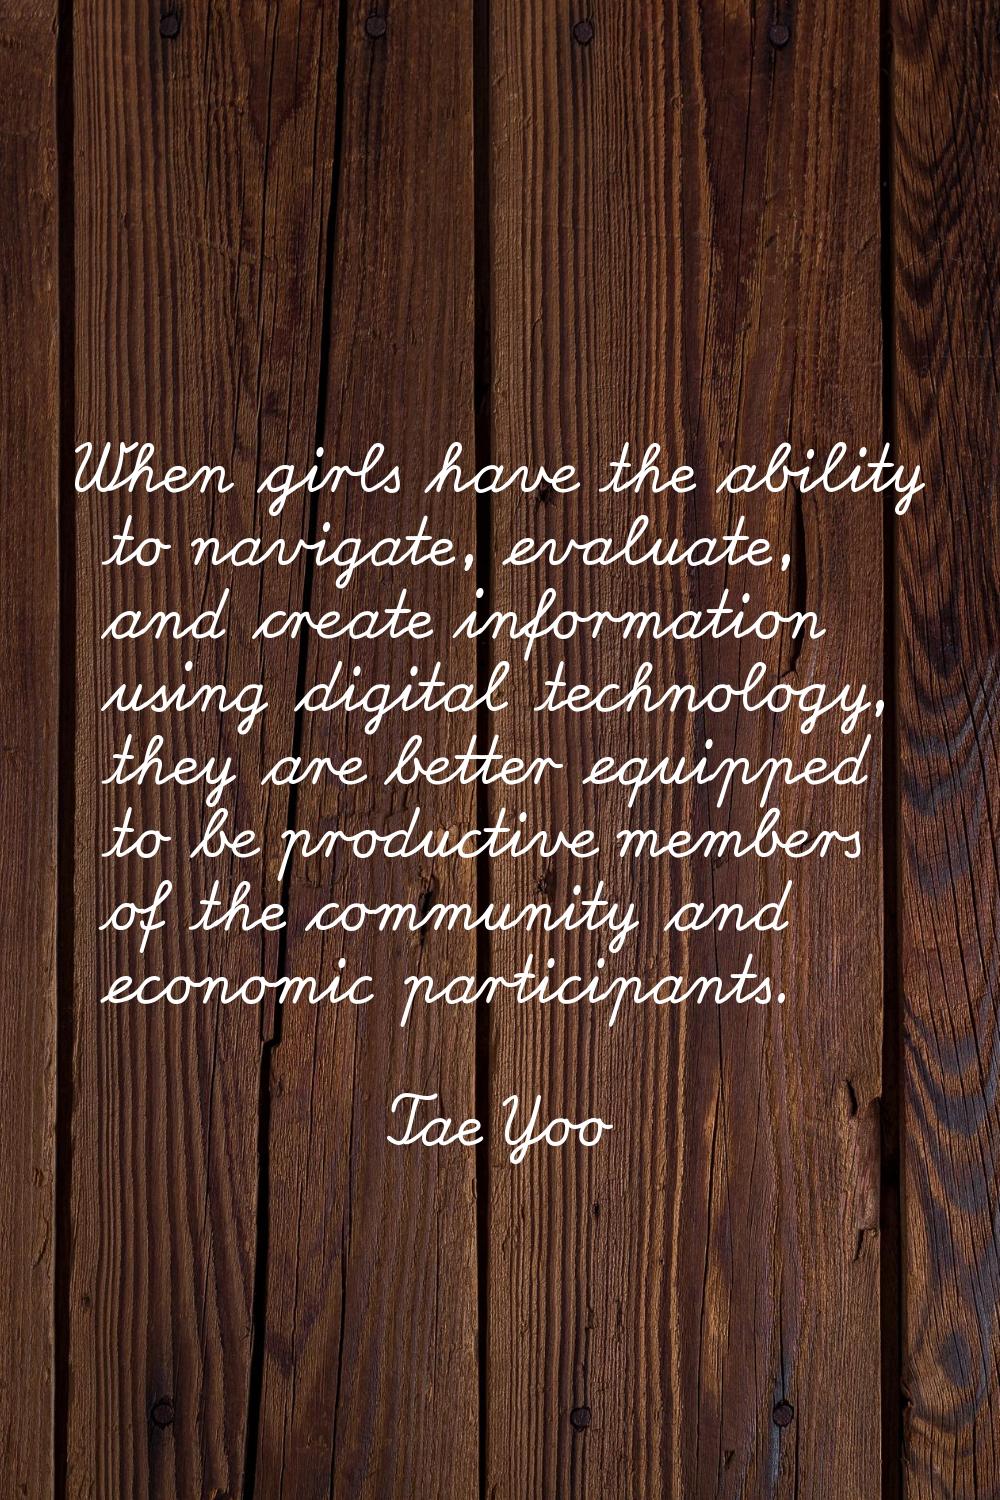 When girls have the ability to navigate, evaluate, and create information using digital technology,